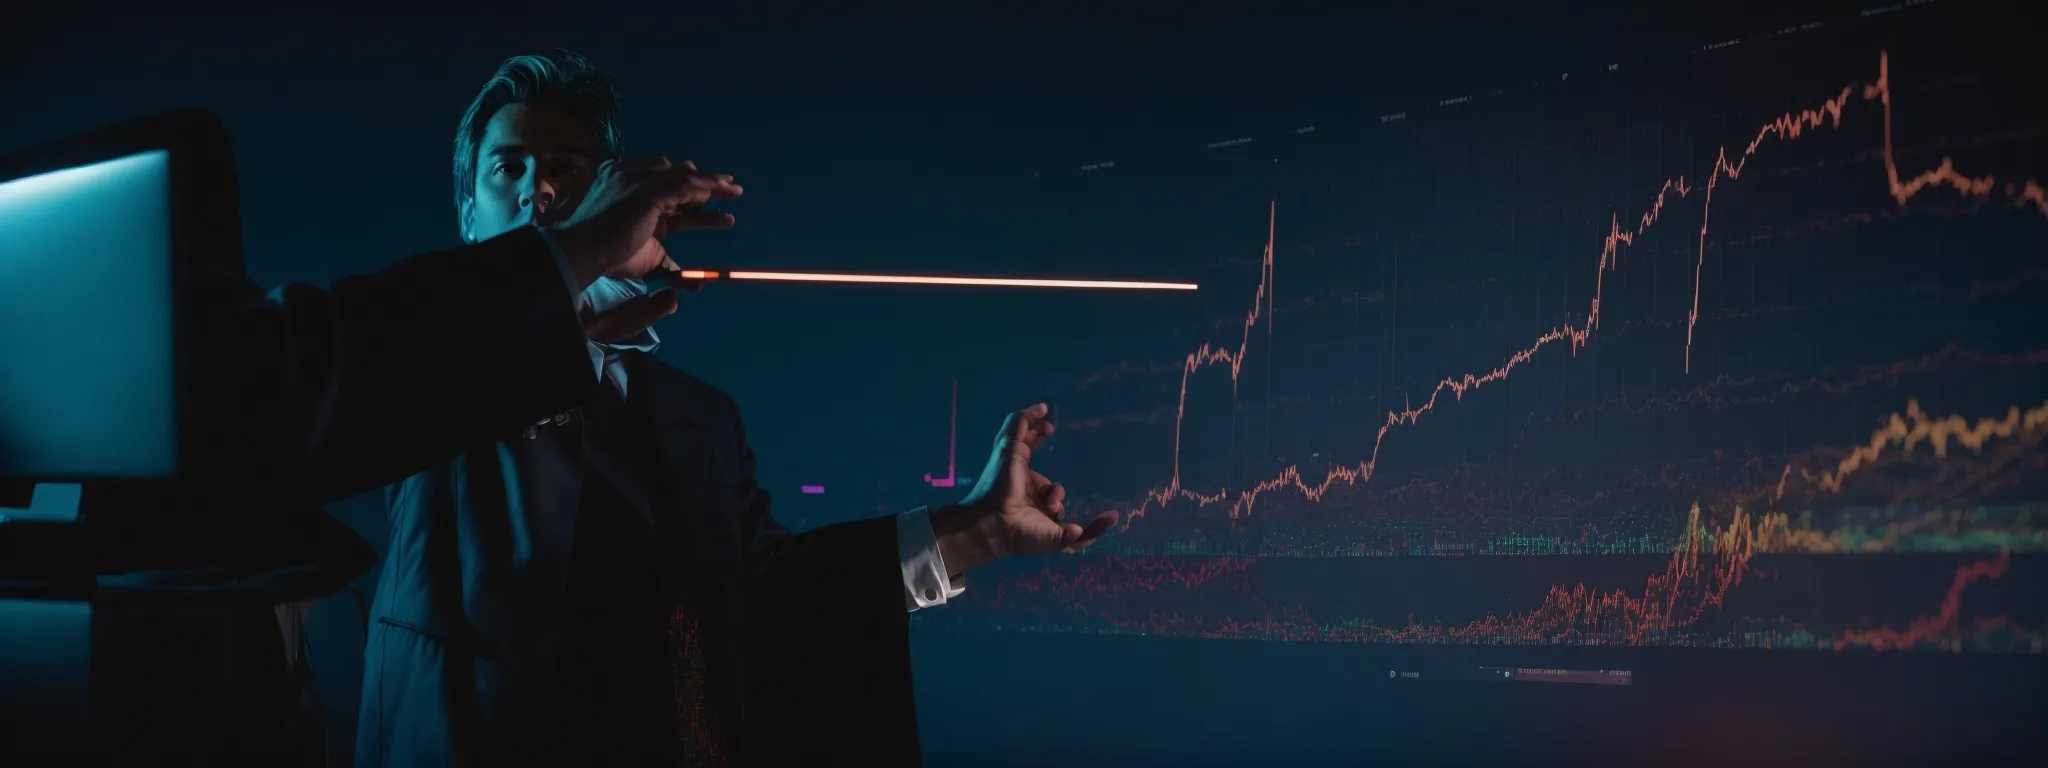 a magician expertly waving a wand over a computer screen that glows with a rising graph symbolizing increasing website traffic.